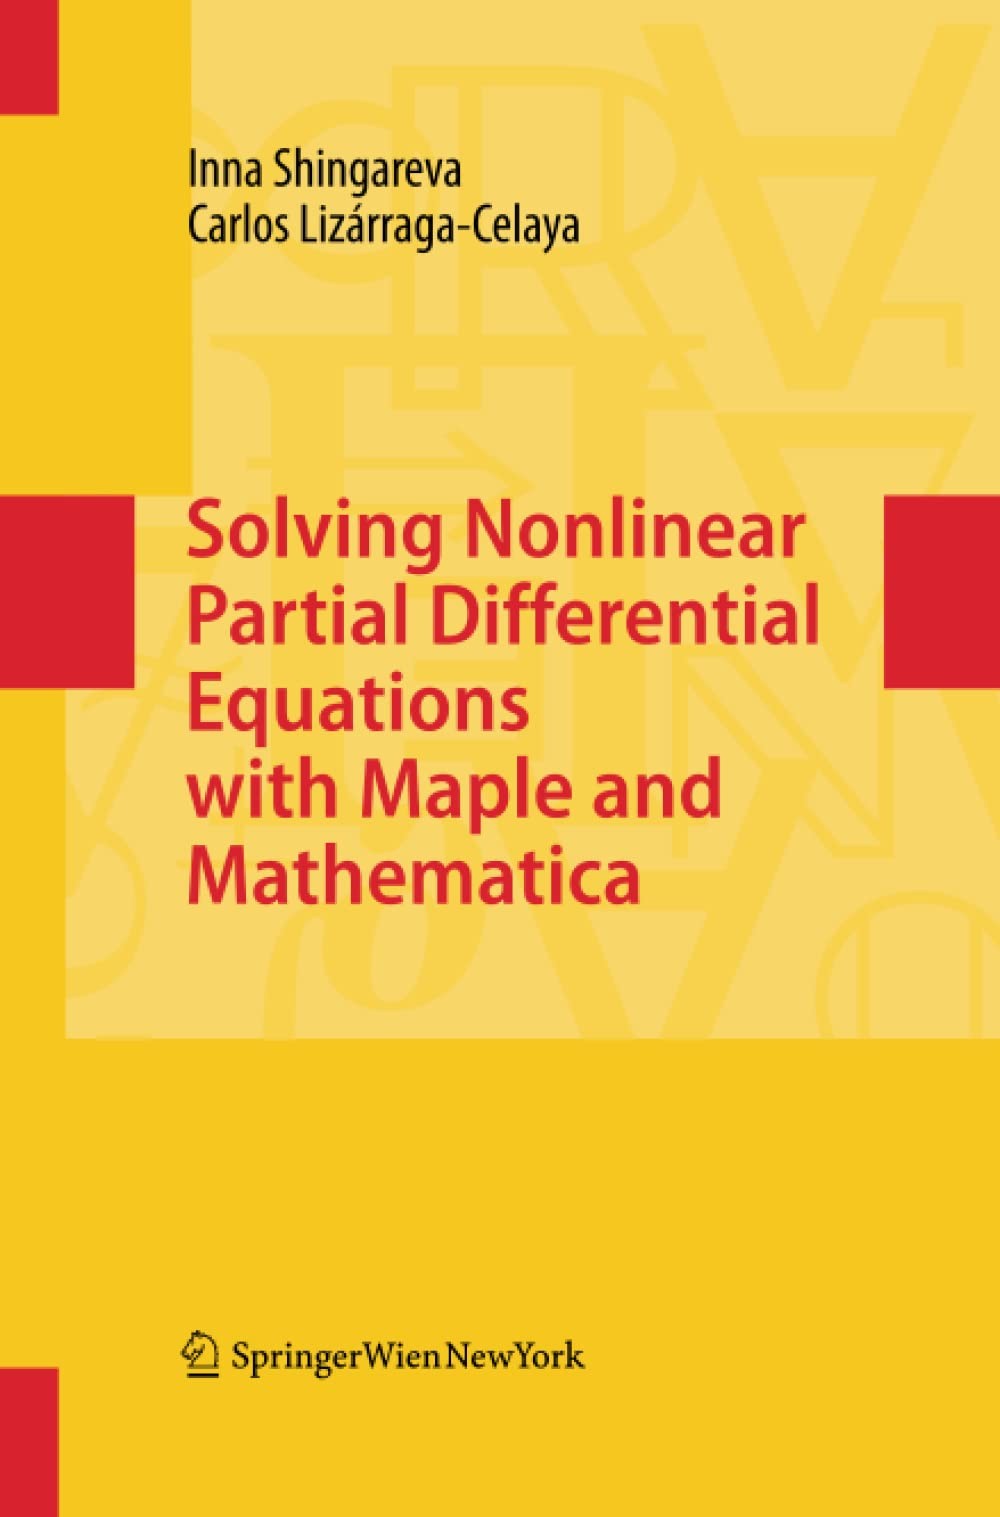 Solving Nonlinear Partial Differential Equations with Maple® and Mathematica®